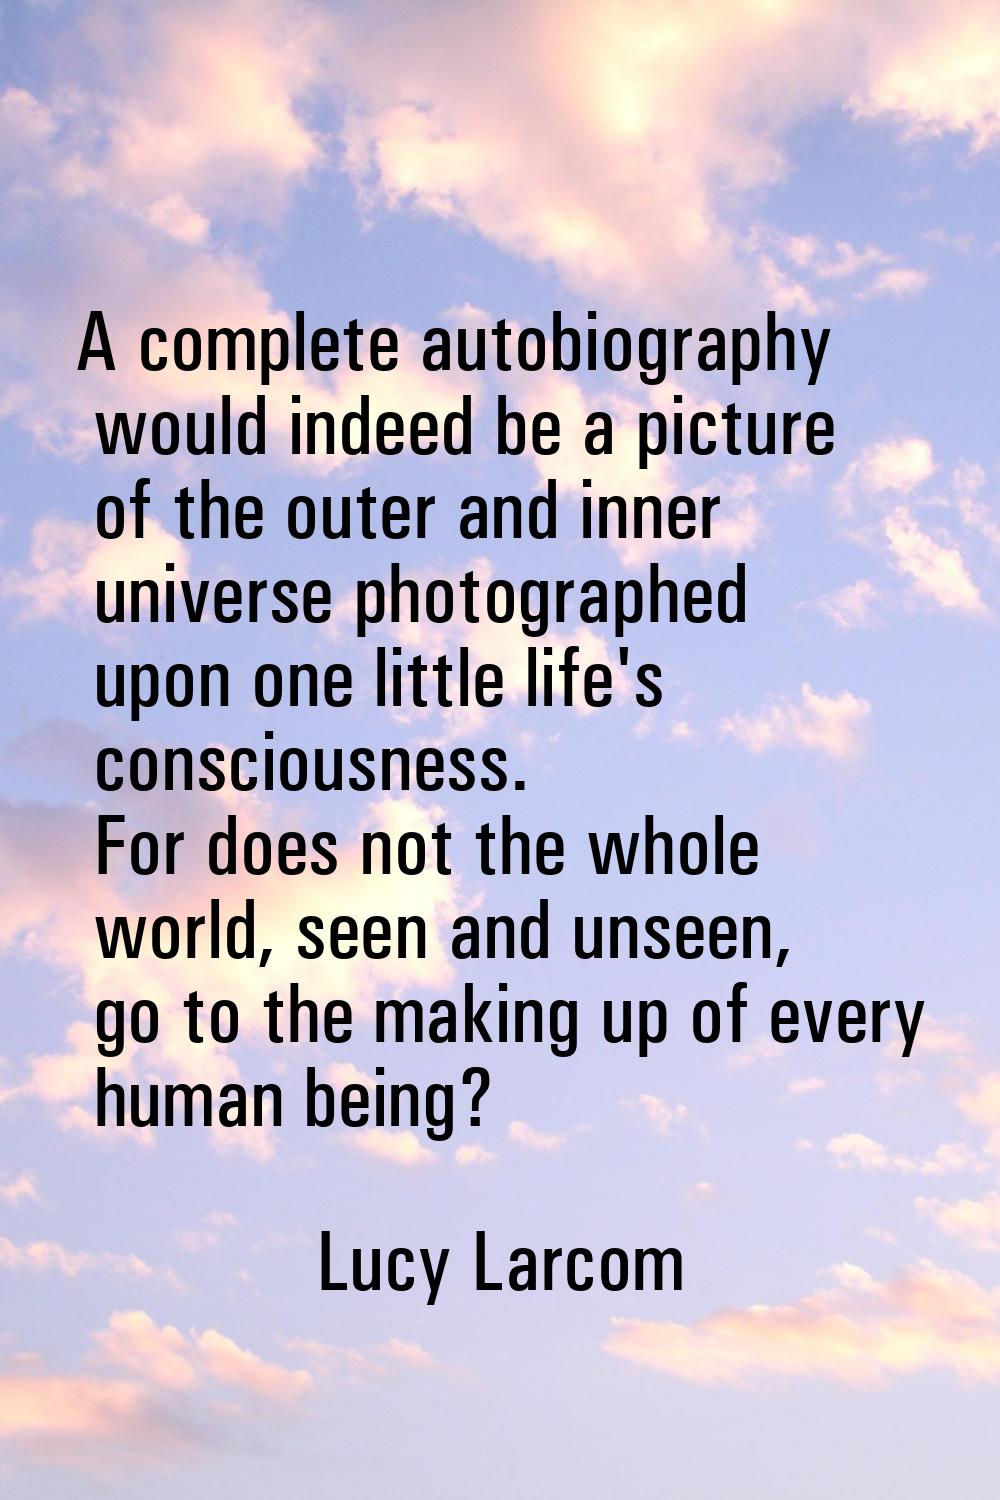 A complete autobiography would indeed be a picture of the outer and inner universe photographed upo